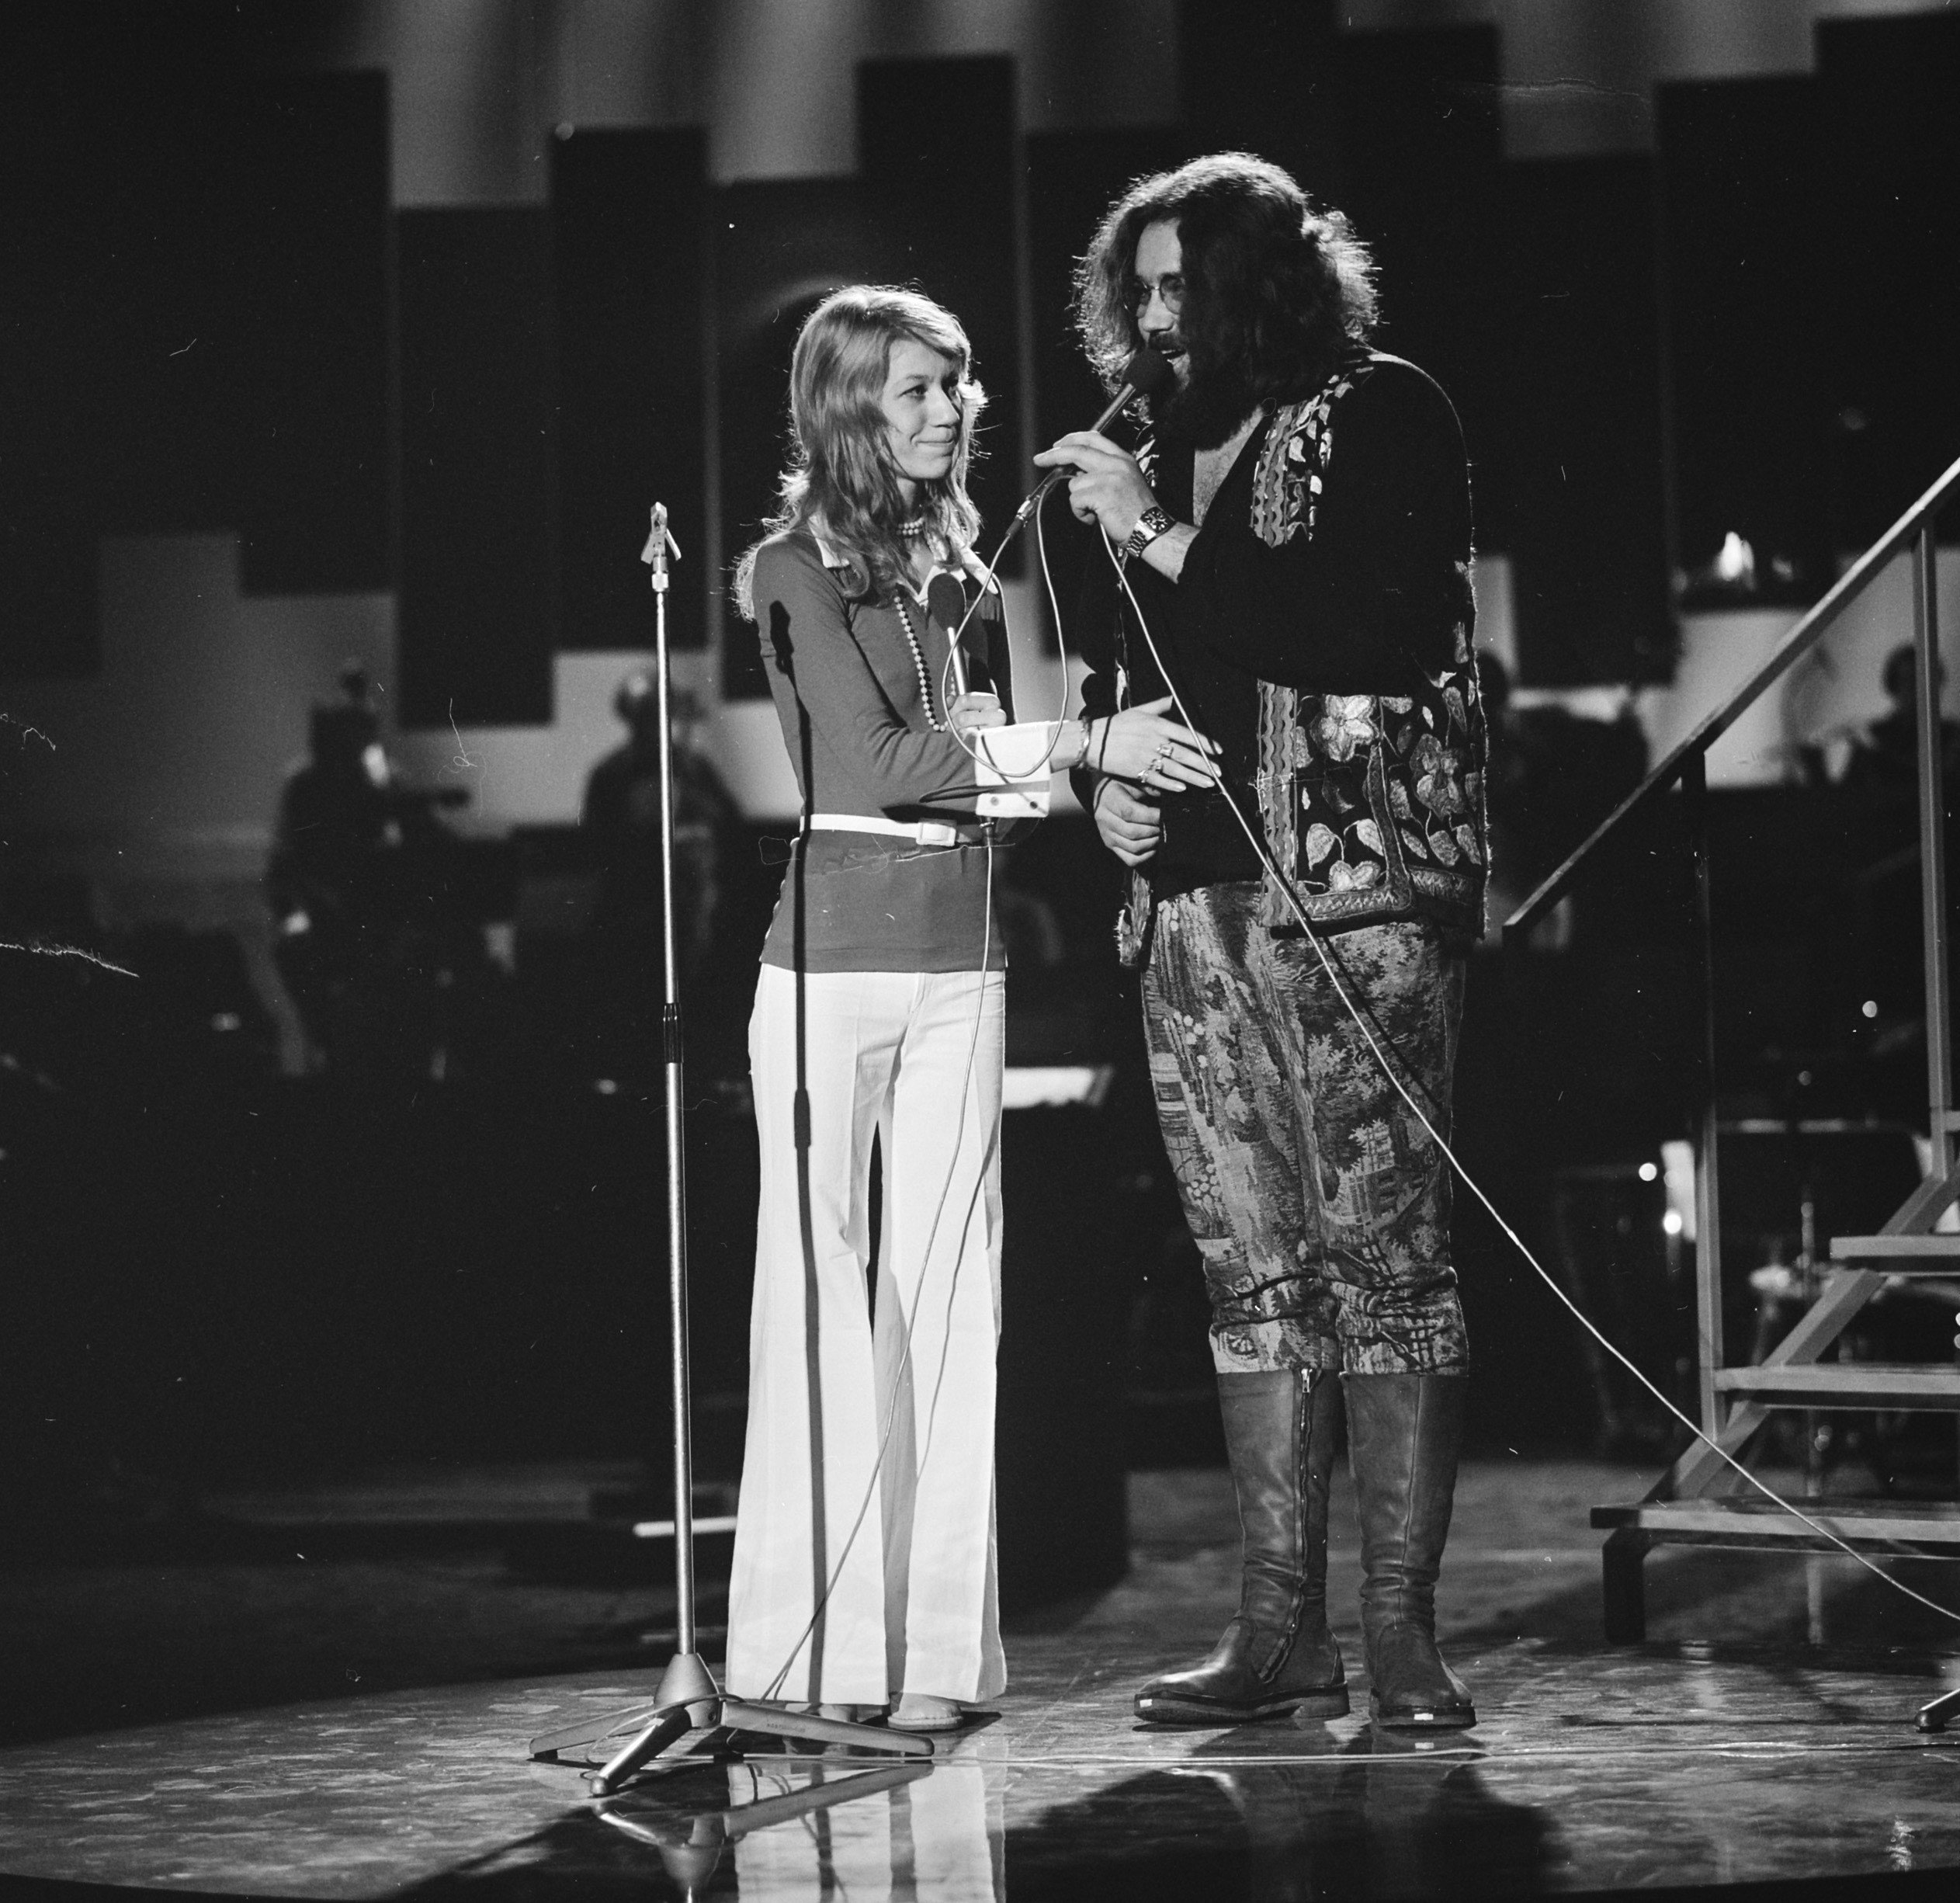 Mouth & MacNeal rehearsing for the Eurovision Song Contest 1974